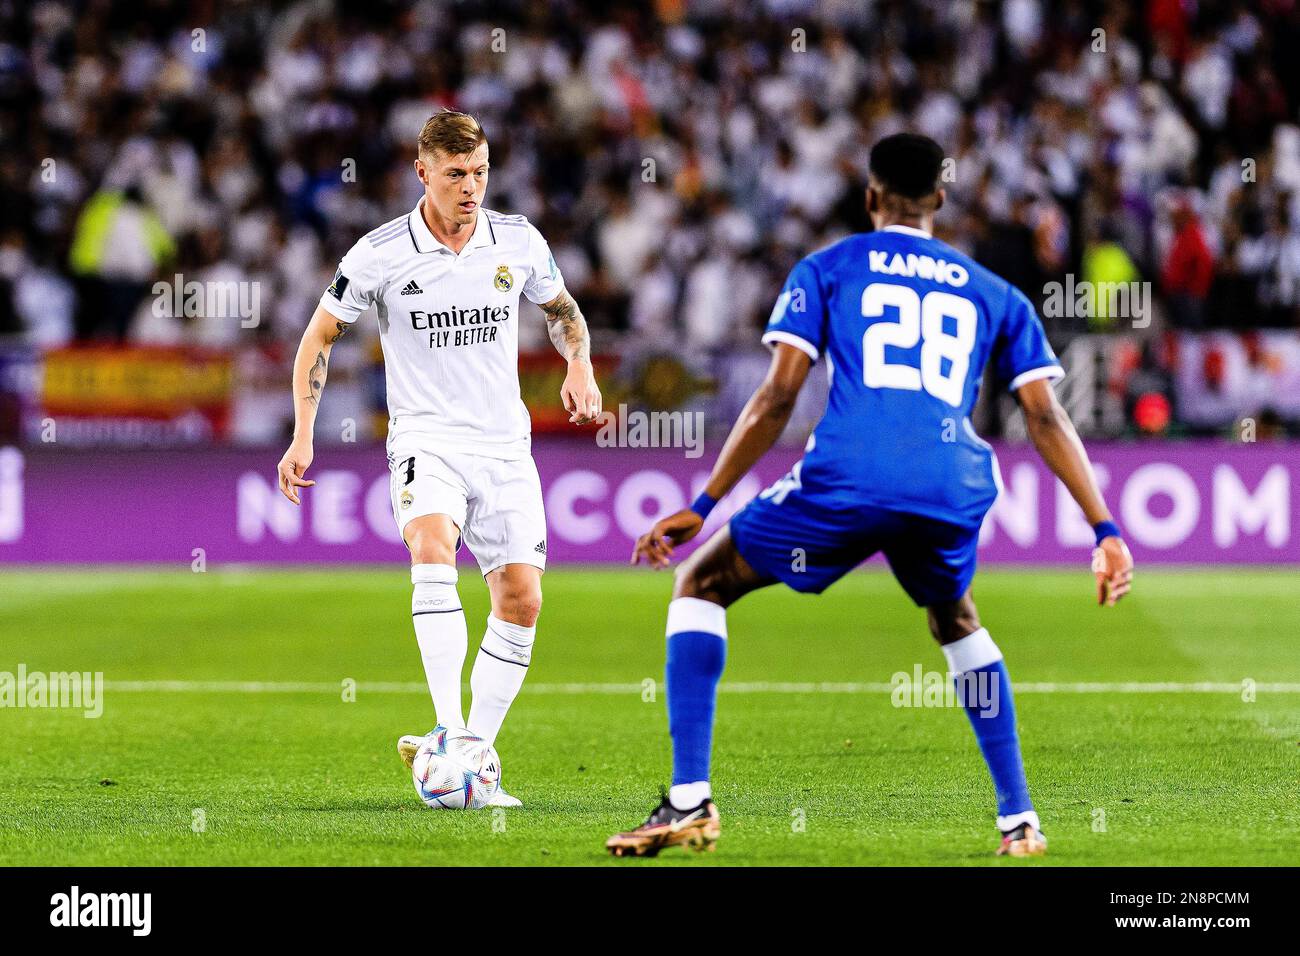 Rabat, Morocco. 11th Feb, 2023. Prince Moulay Abdellah Stadium Toni Kroos of Real Madrid before the match between Real Madrid and Al Hilal, valid for the 2022 FIFA Club World Cup final, held at the Prince Moulay Abdellah Stadium in Rabat, Morocco (Richard Callis/SPP) Credit: SPP Sport Press Photo. /Alamy Live News Stock Photo